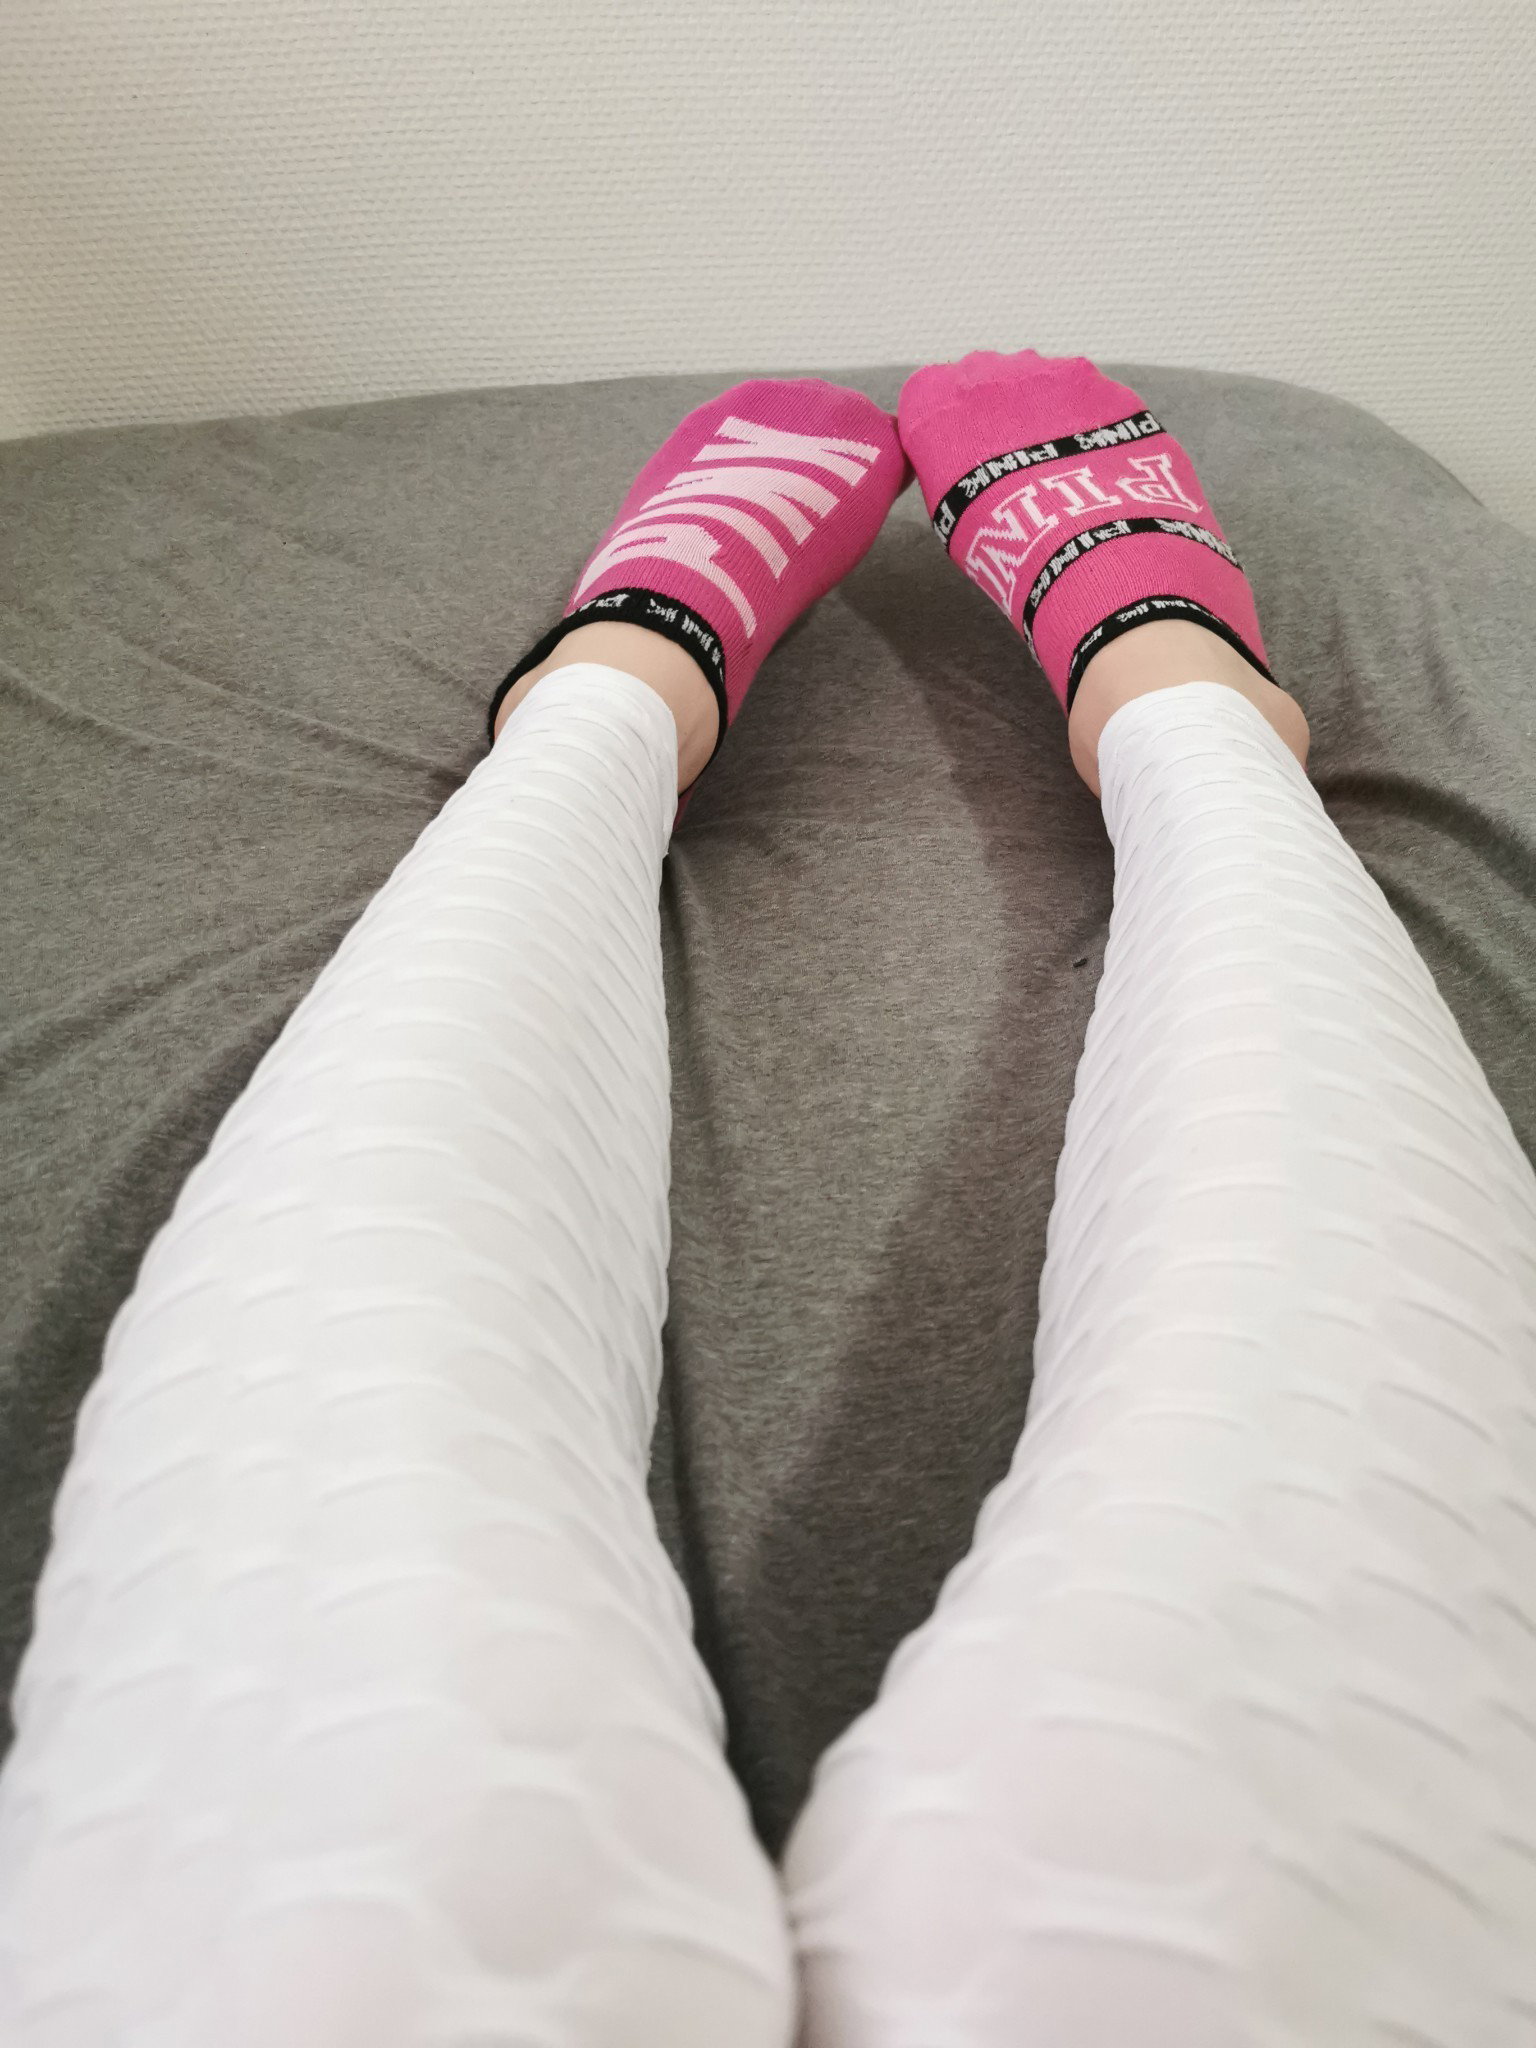 Photo by Pafyo with the username @Pafyo,  June 8, 2020 at 11:14 AM. The post is about the topic #Lovesocks